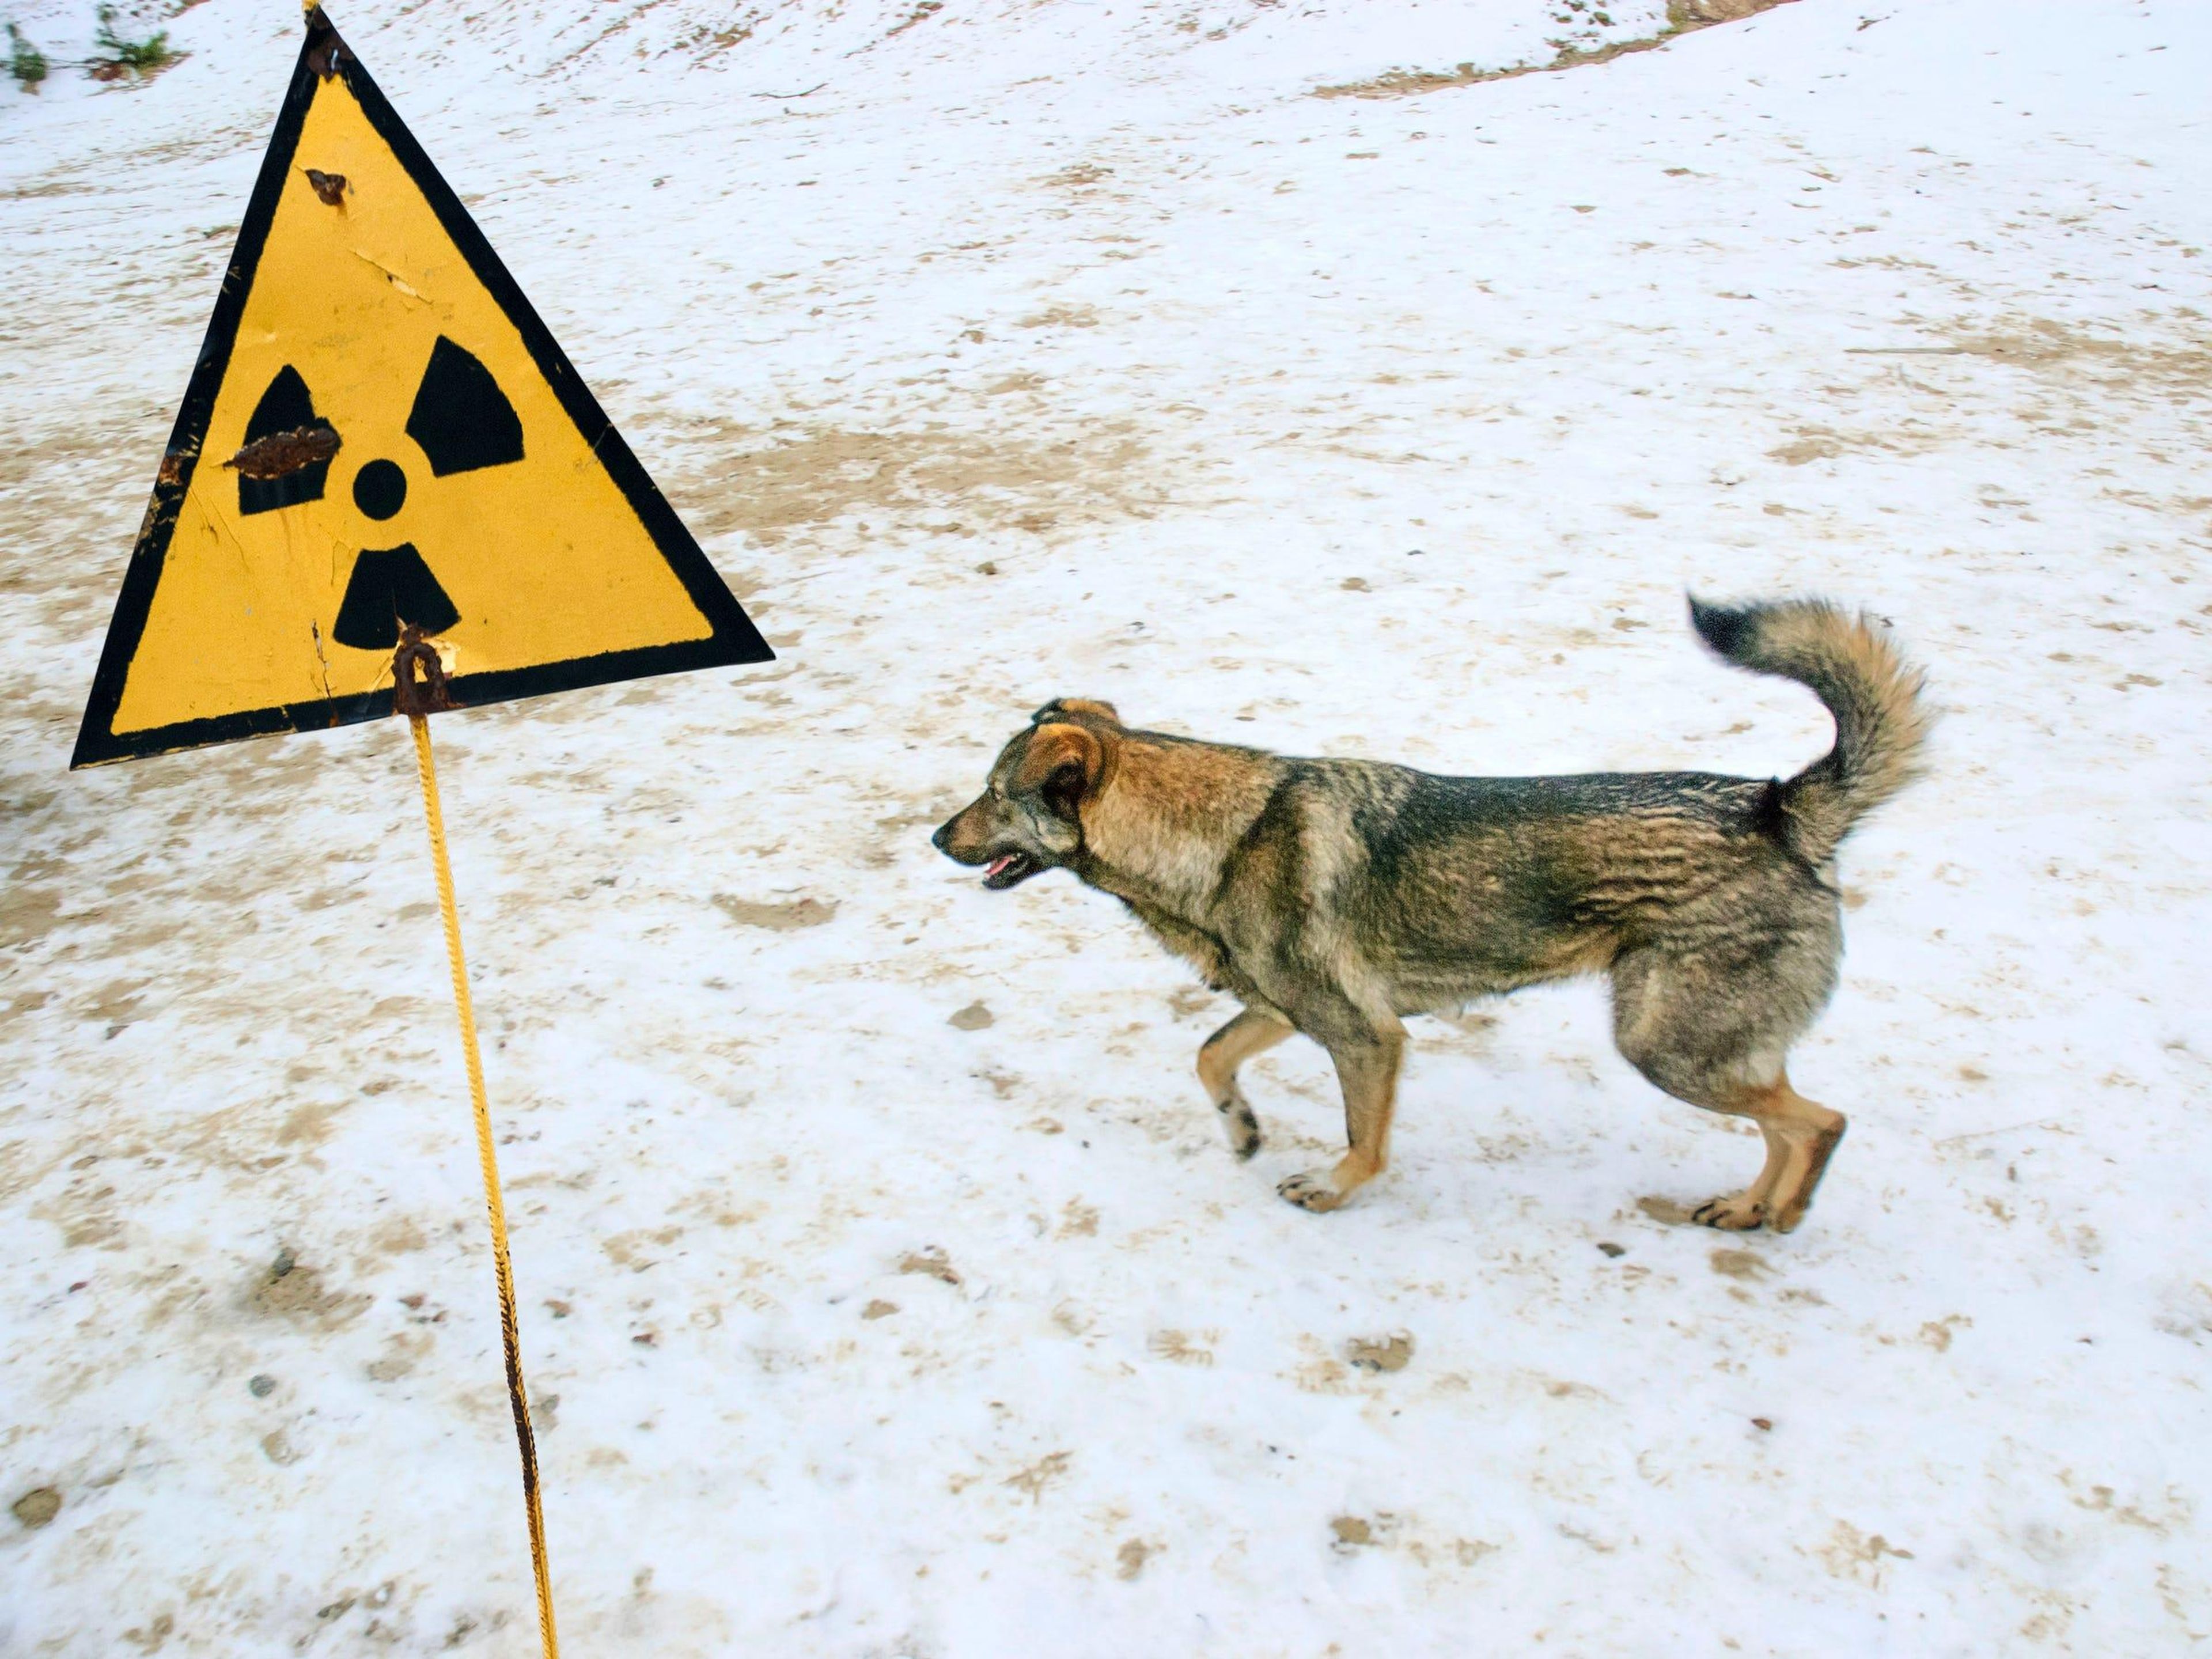 When people were evacuated from Chernobyl in 1986, many left their pets behind thinking that they would soon return. After they were unable to return, Soviet Army soldiers were sent to kill the pets that had been left behind.